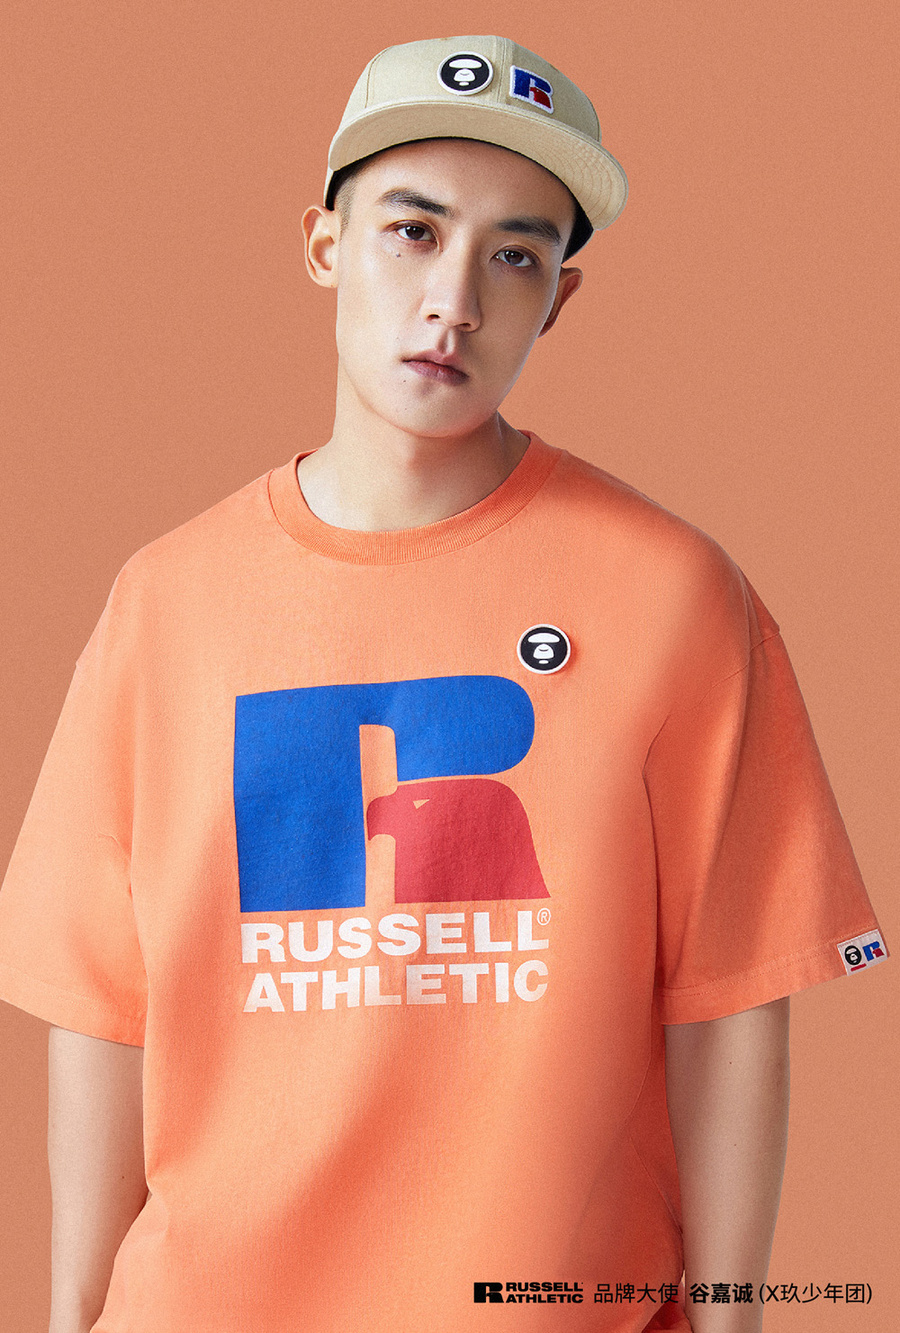 RUSSELL ATHLETIC,AAPENOW,AAPE,  复古运动风！RUSSELL ATHLETIC x AAPENOW 春夏新品即将发售！